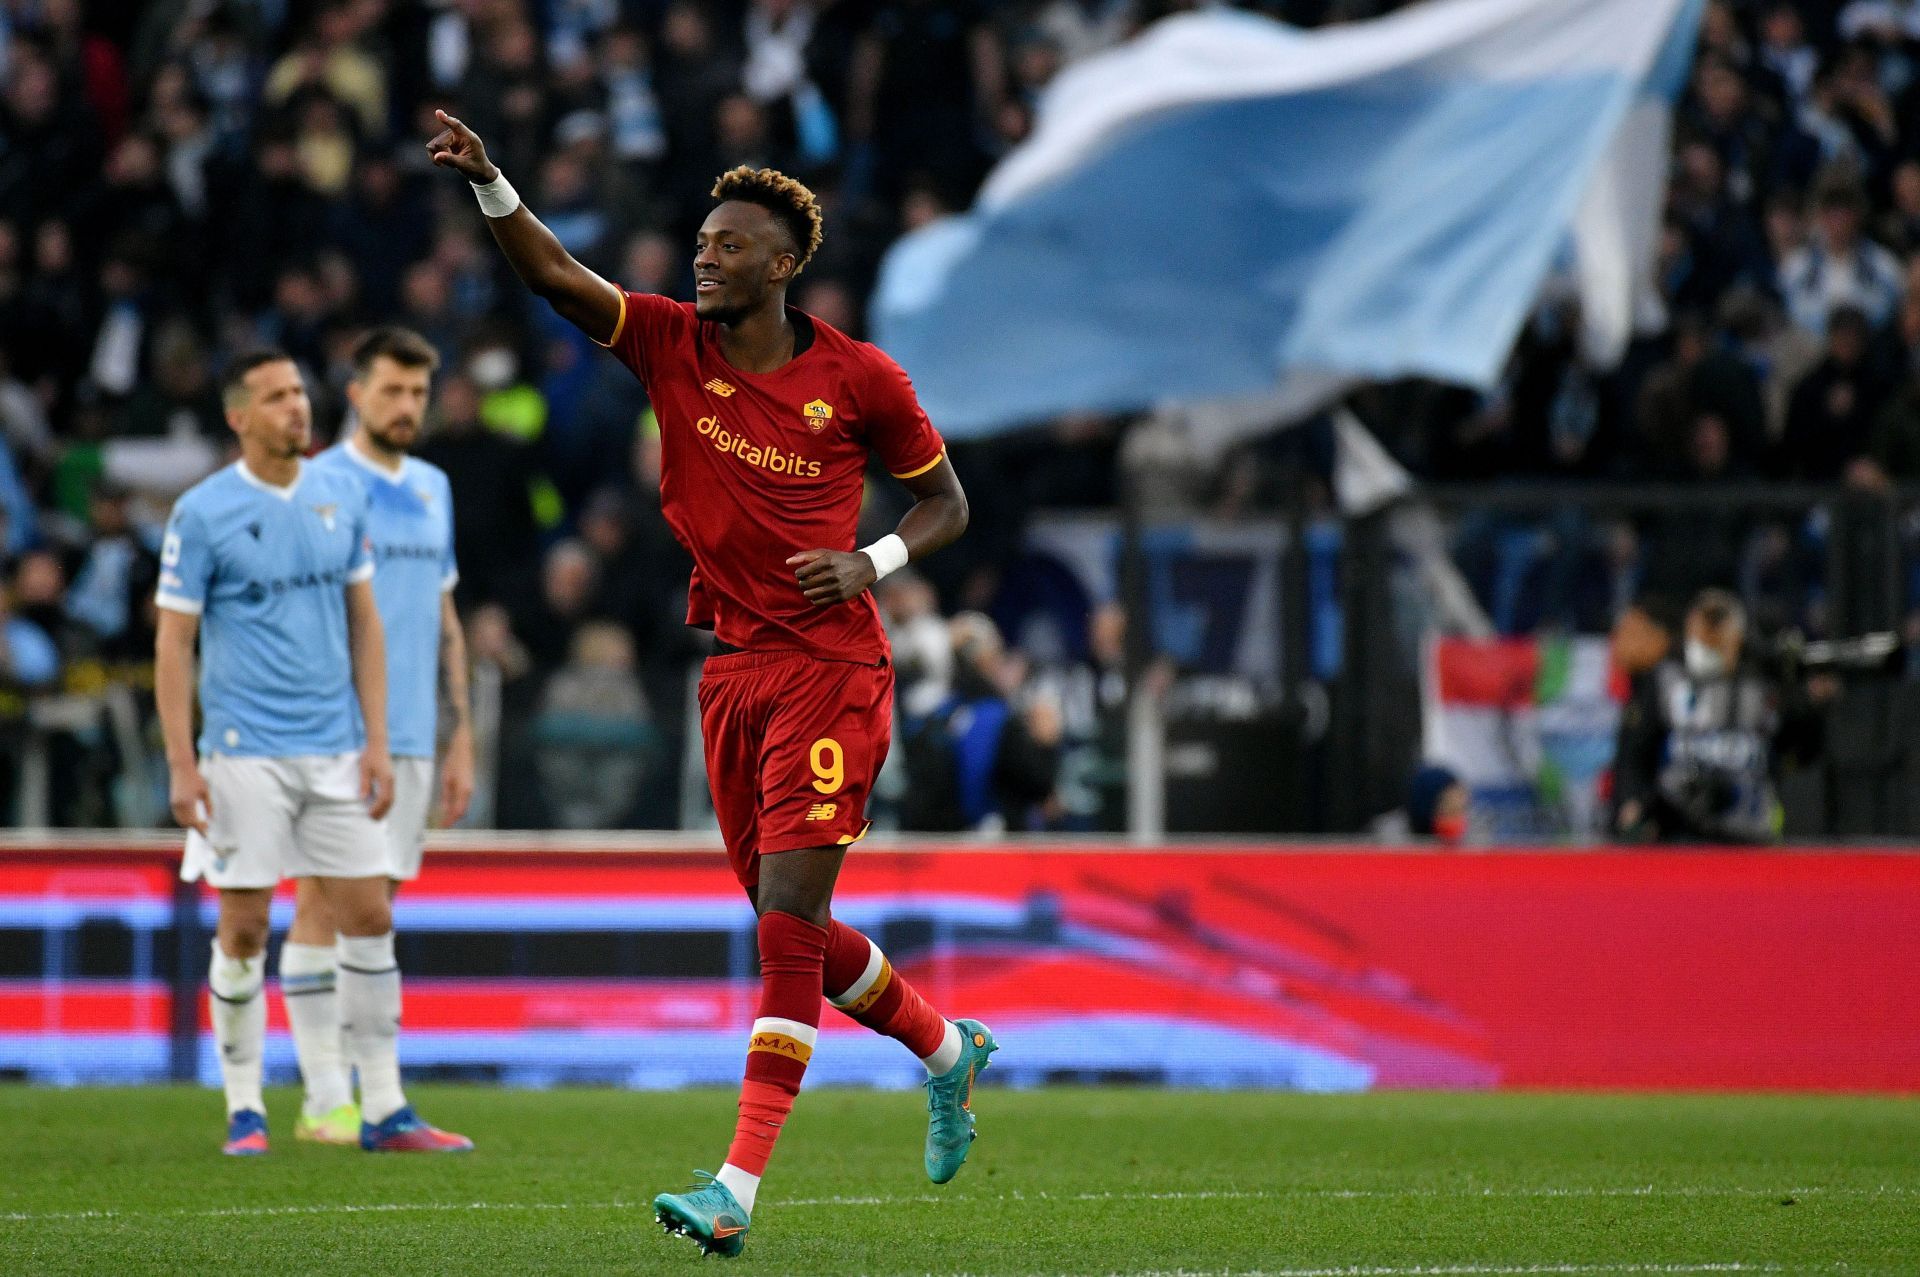 Tammy Abraham has found greater game time at AS Roma